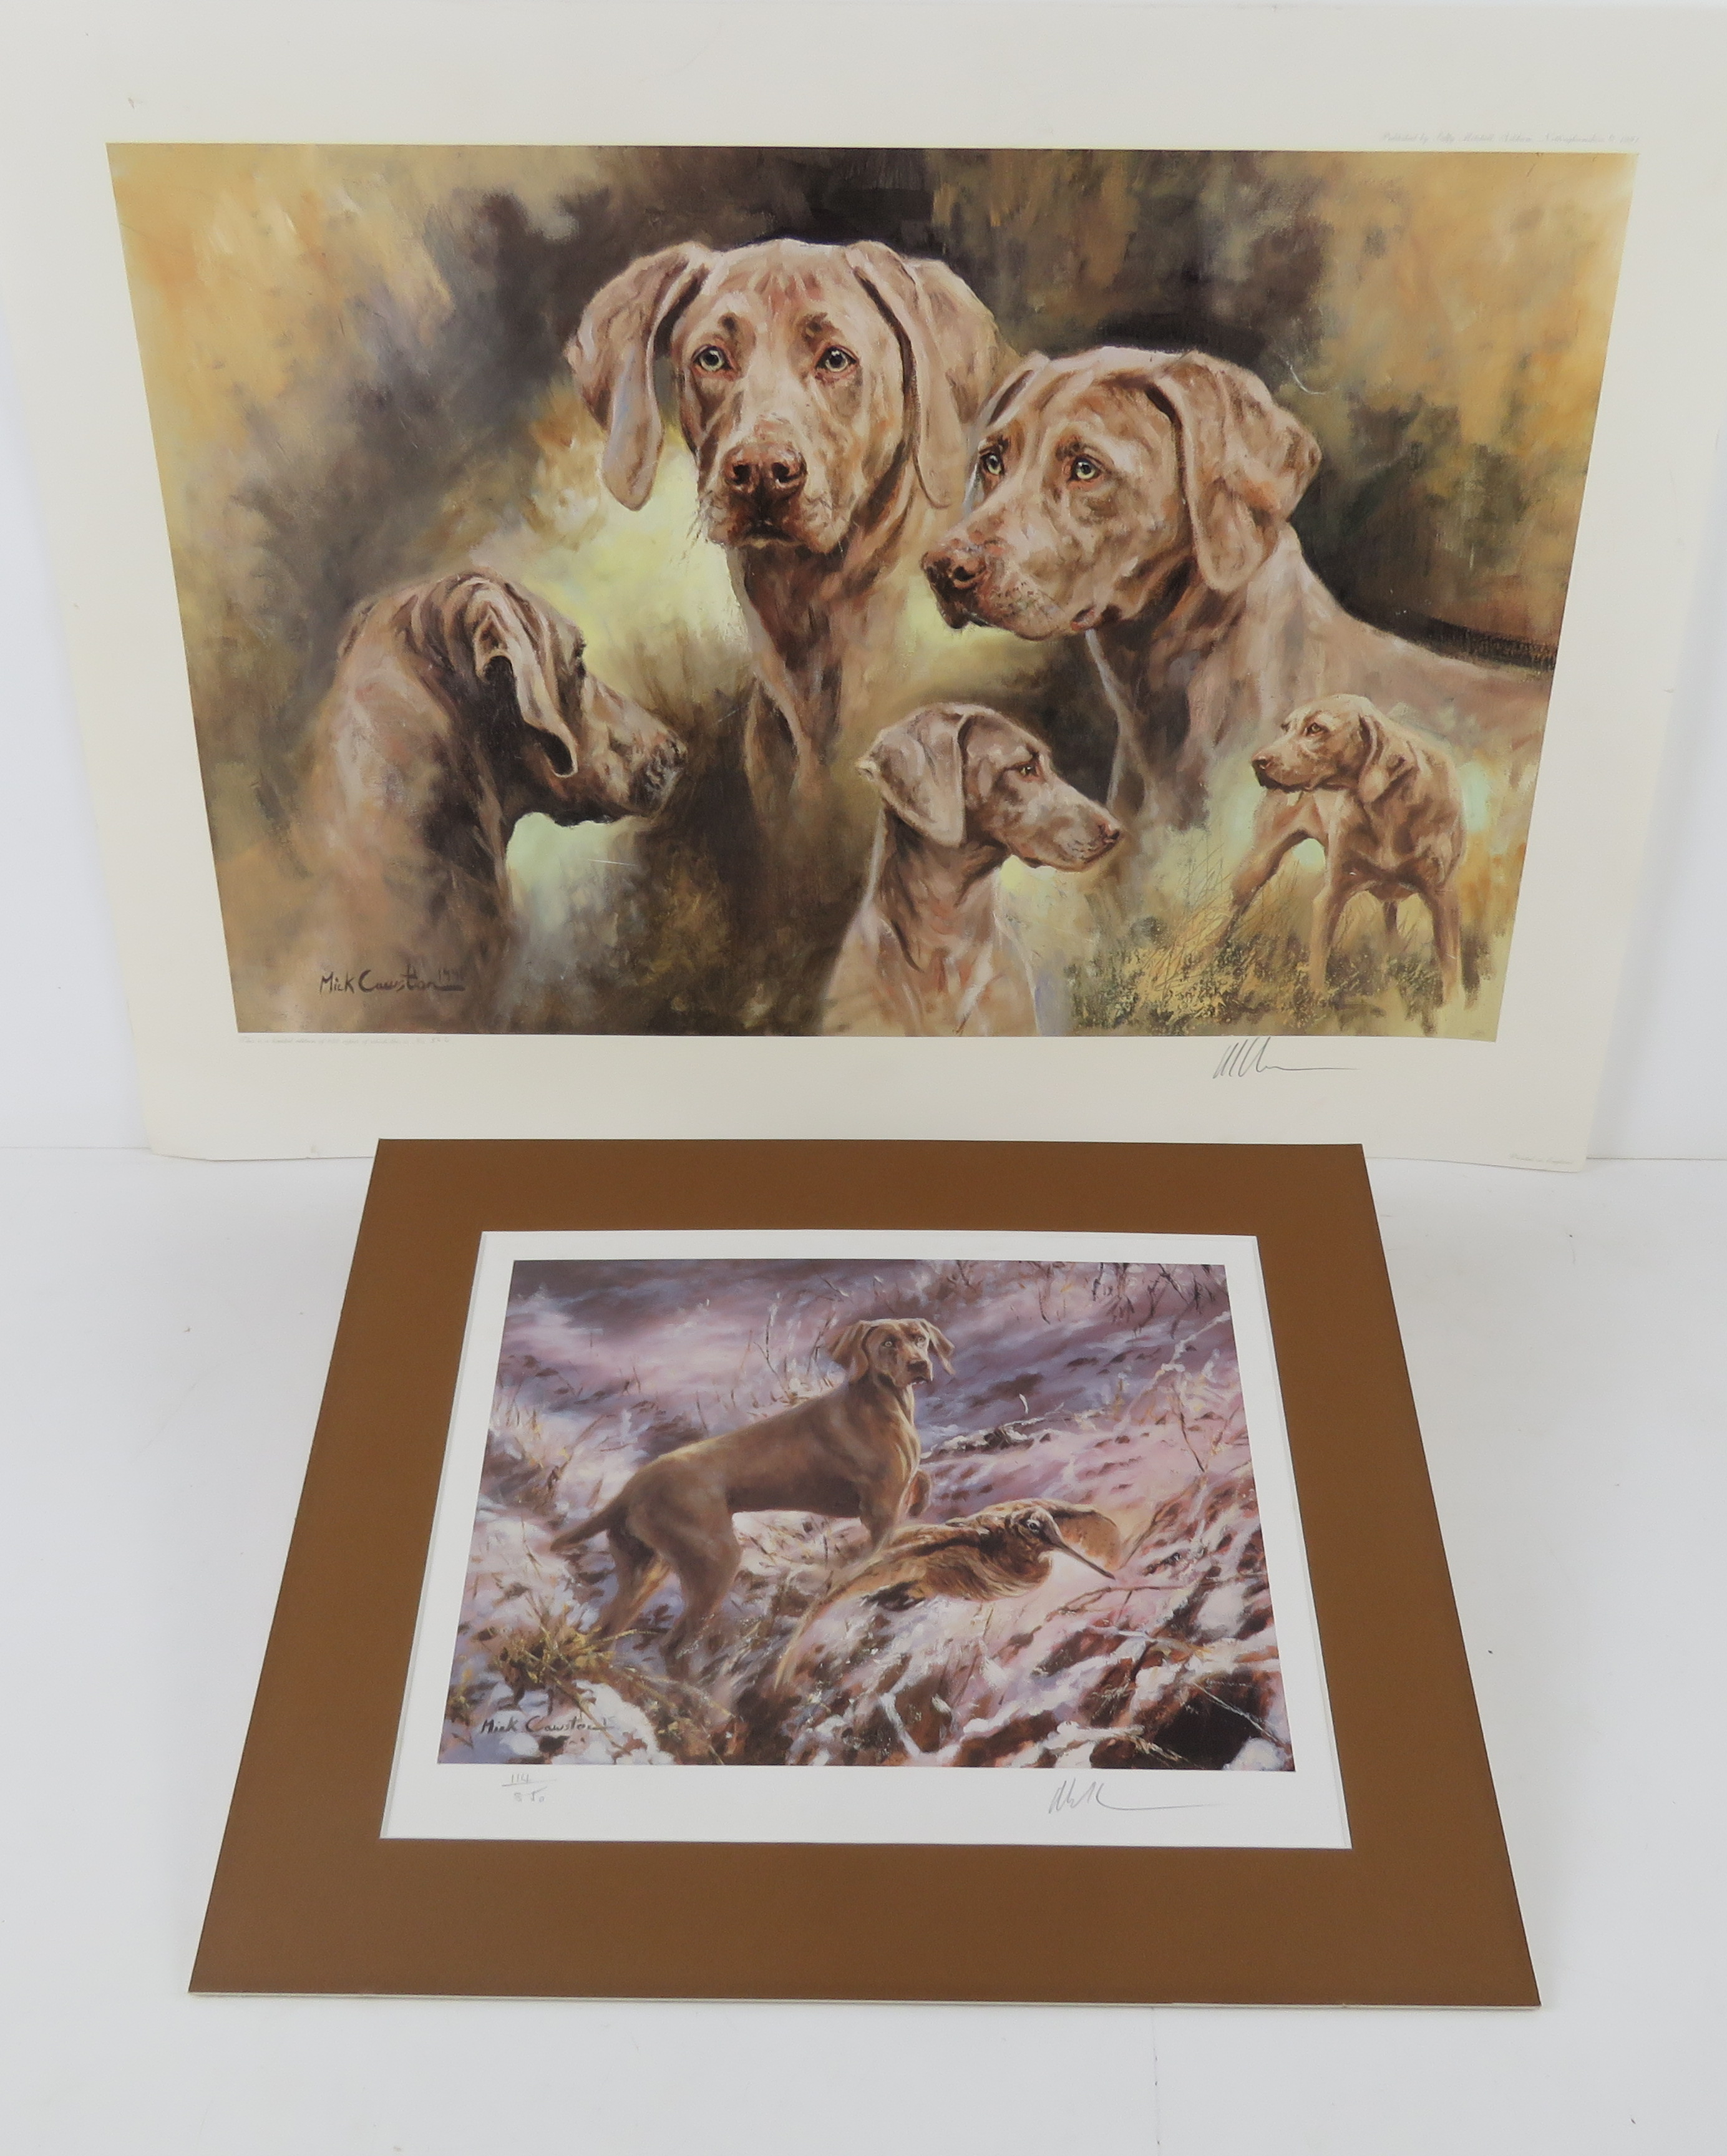 Two signed limited edition Mick Cawston prints of Weimaraners, the larger being No 566/850,